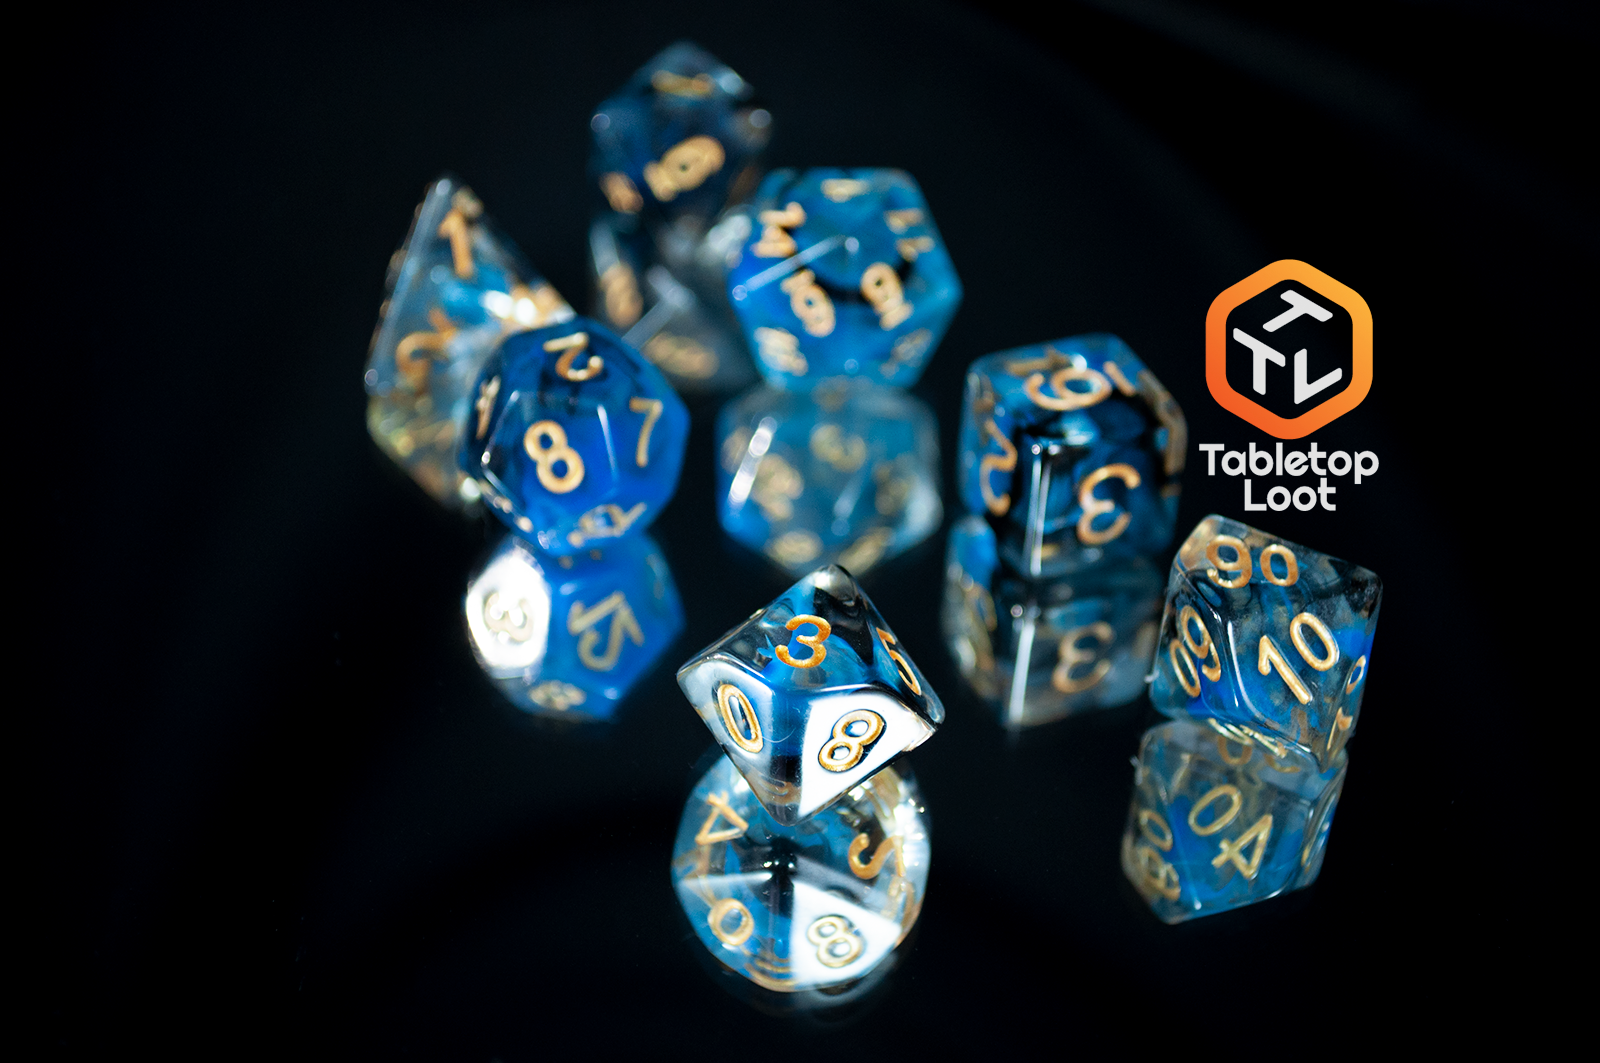 The Arcane Eye 7 piece dice set from Tabletop Loot with swirls of blue and black in clear dice and gold numbering.